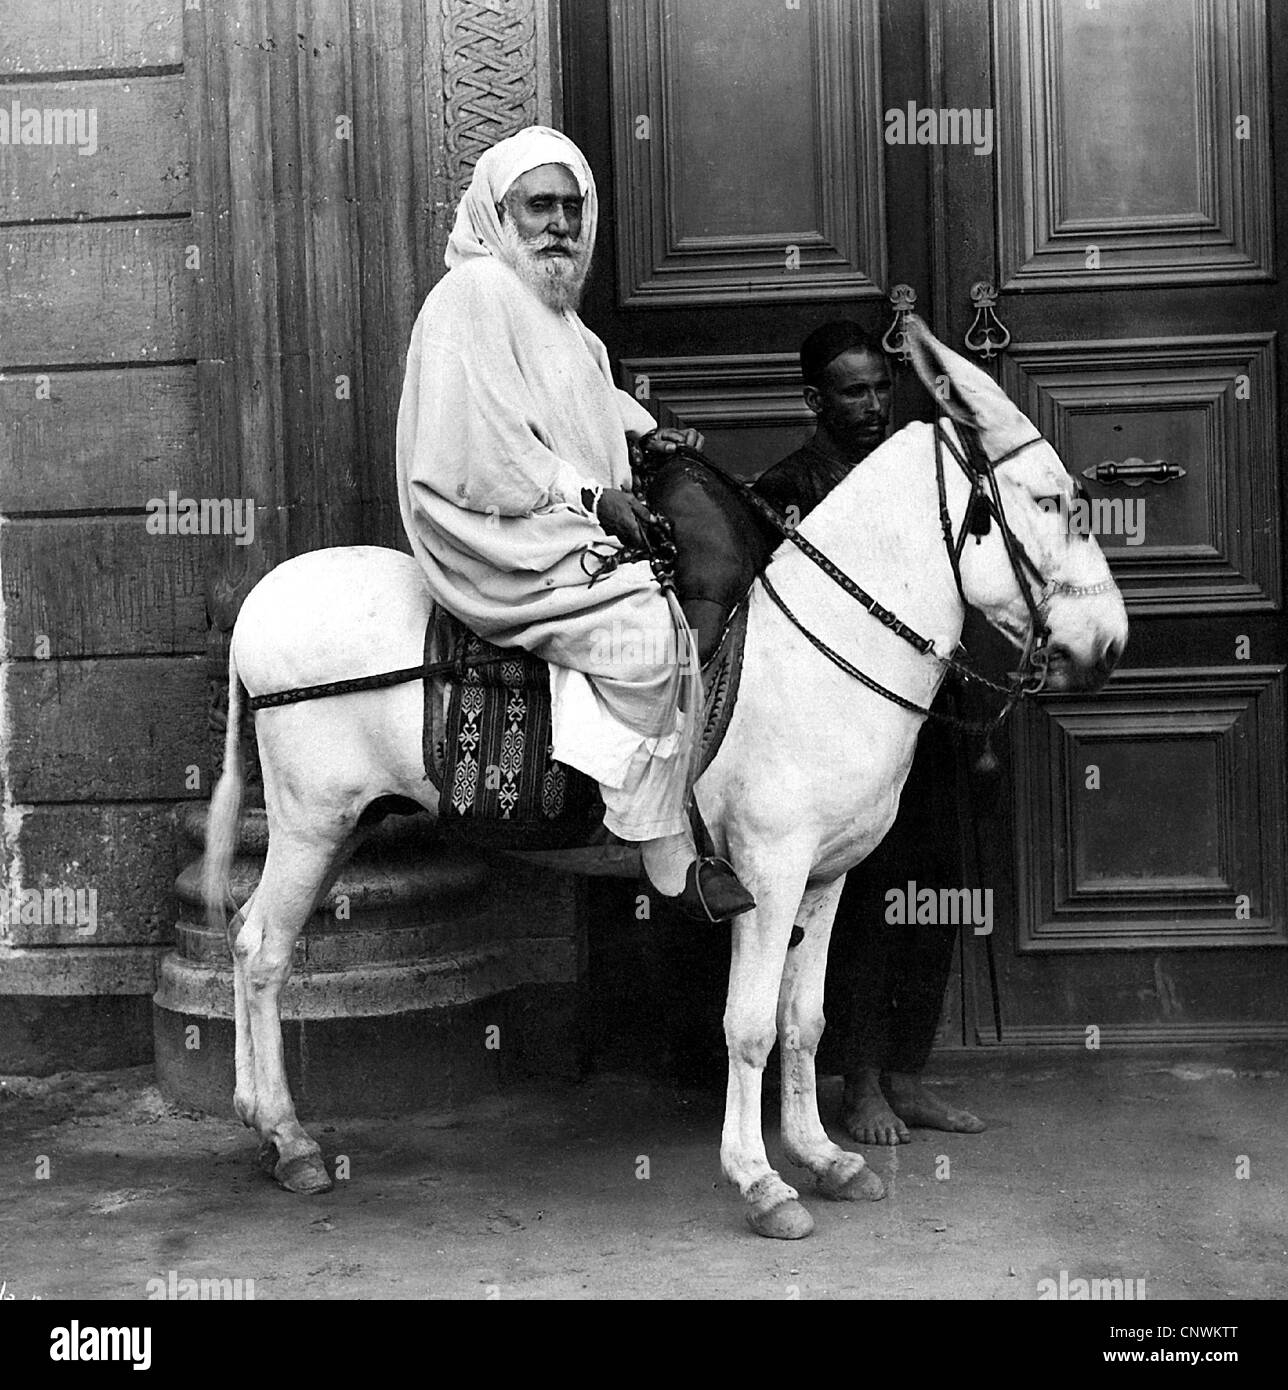 geography / travel, Egypt, people, Sheikh on mule, photography by G.Lekegian & Co., late 19th century, historic, historical, mules, native, Egyptian, Arab, Arabian, old man, servant, servants, riding, rider, donkey, donkeys, animal, Additional-Rights-Clearences-Not Available Stock Photo